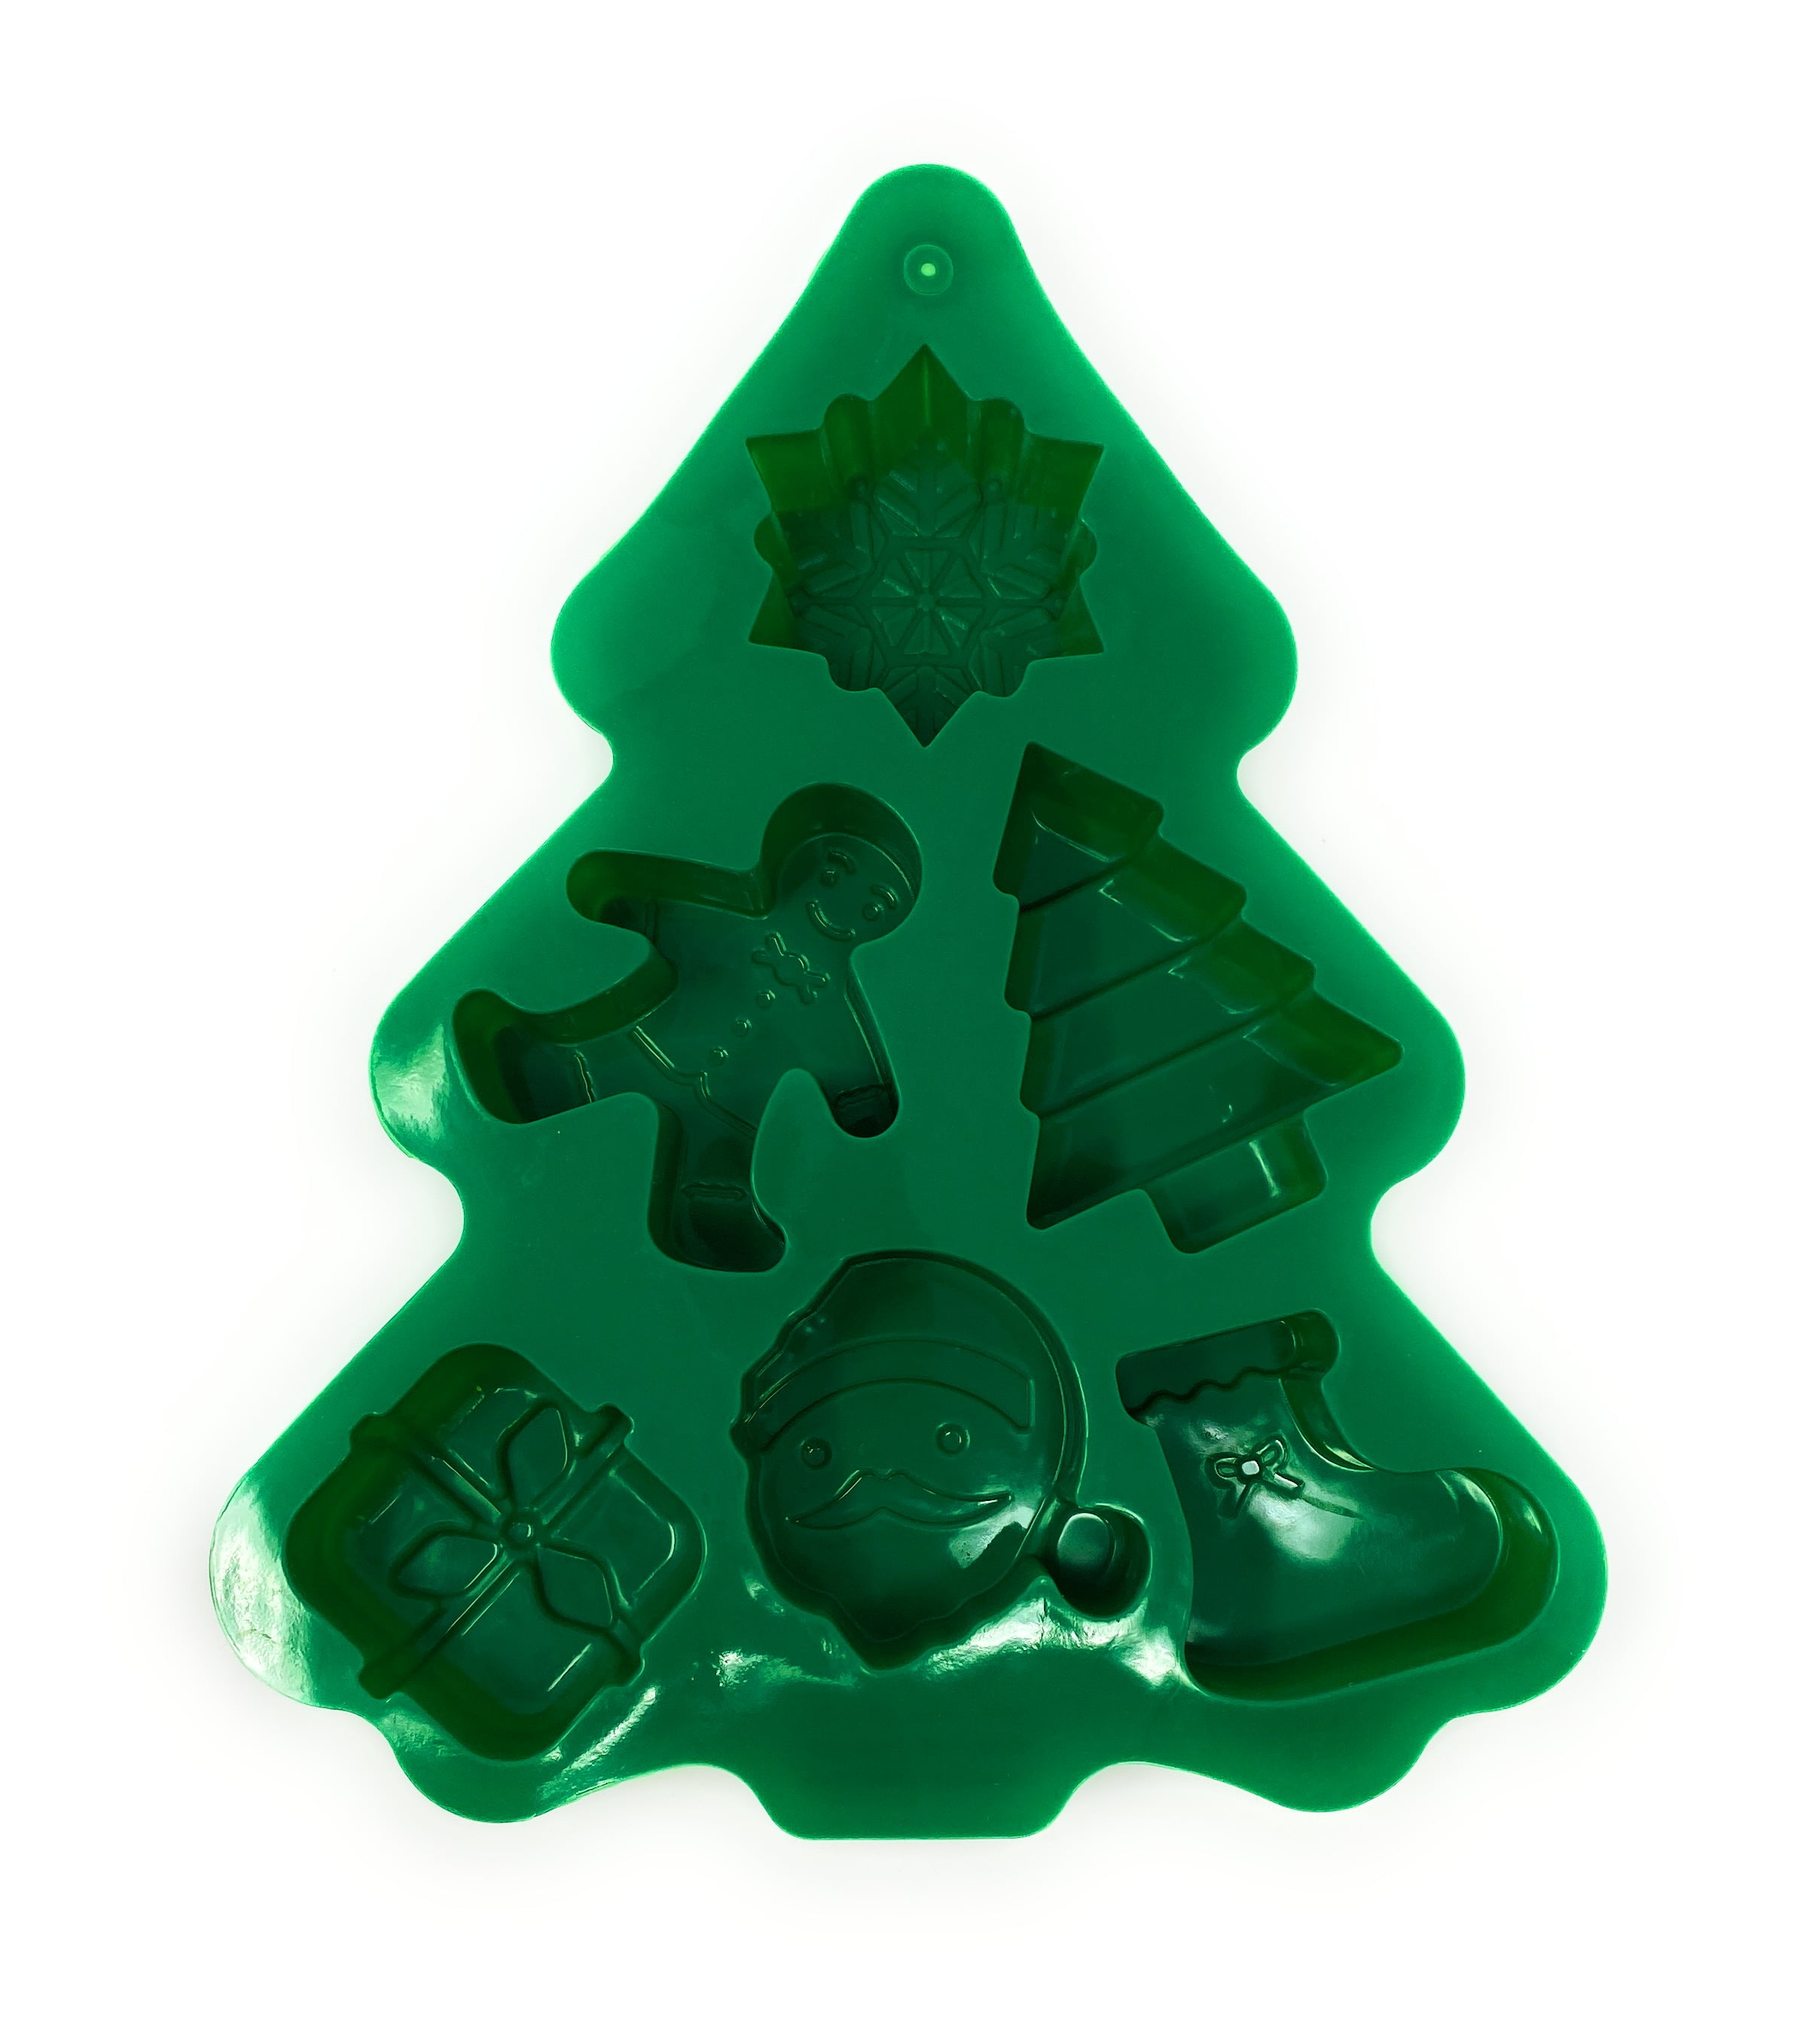  Set of 3 Holiday Christmas Shaped Silicone Ice Cube Soap Making  Trays/Molds - Gingerbread Men/Candy Canes, Snowflakes & Christmas Trees:  Home & Kitchen